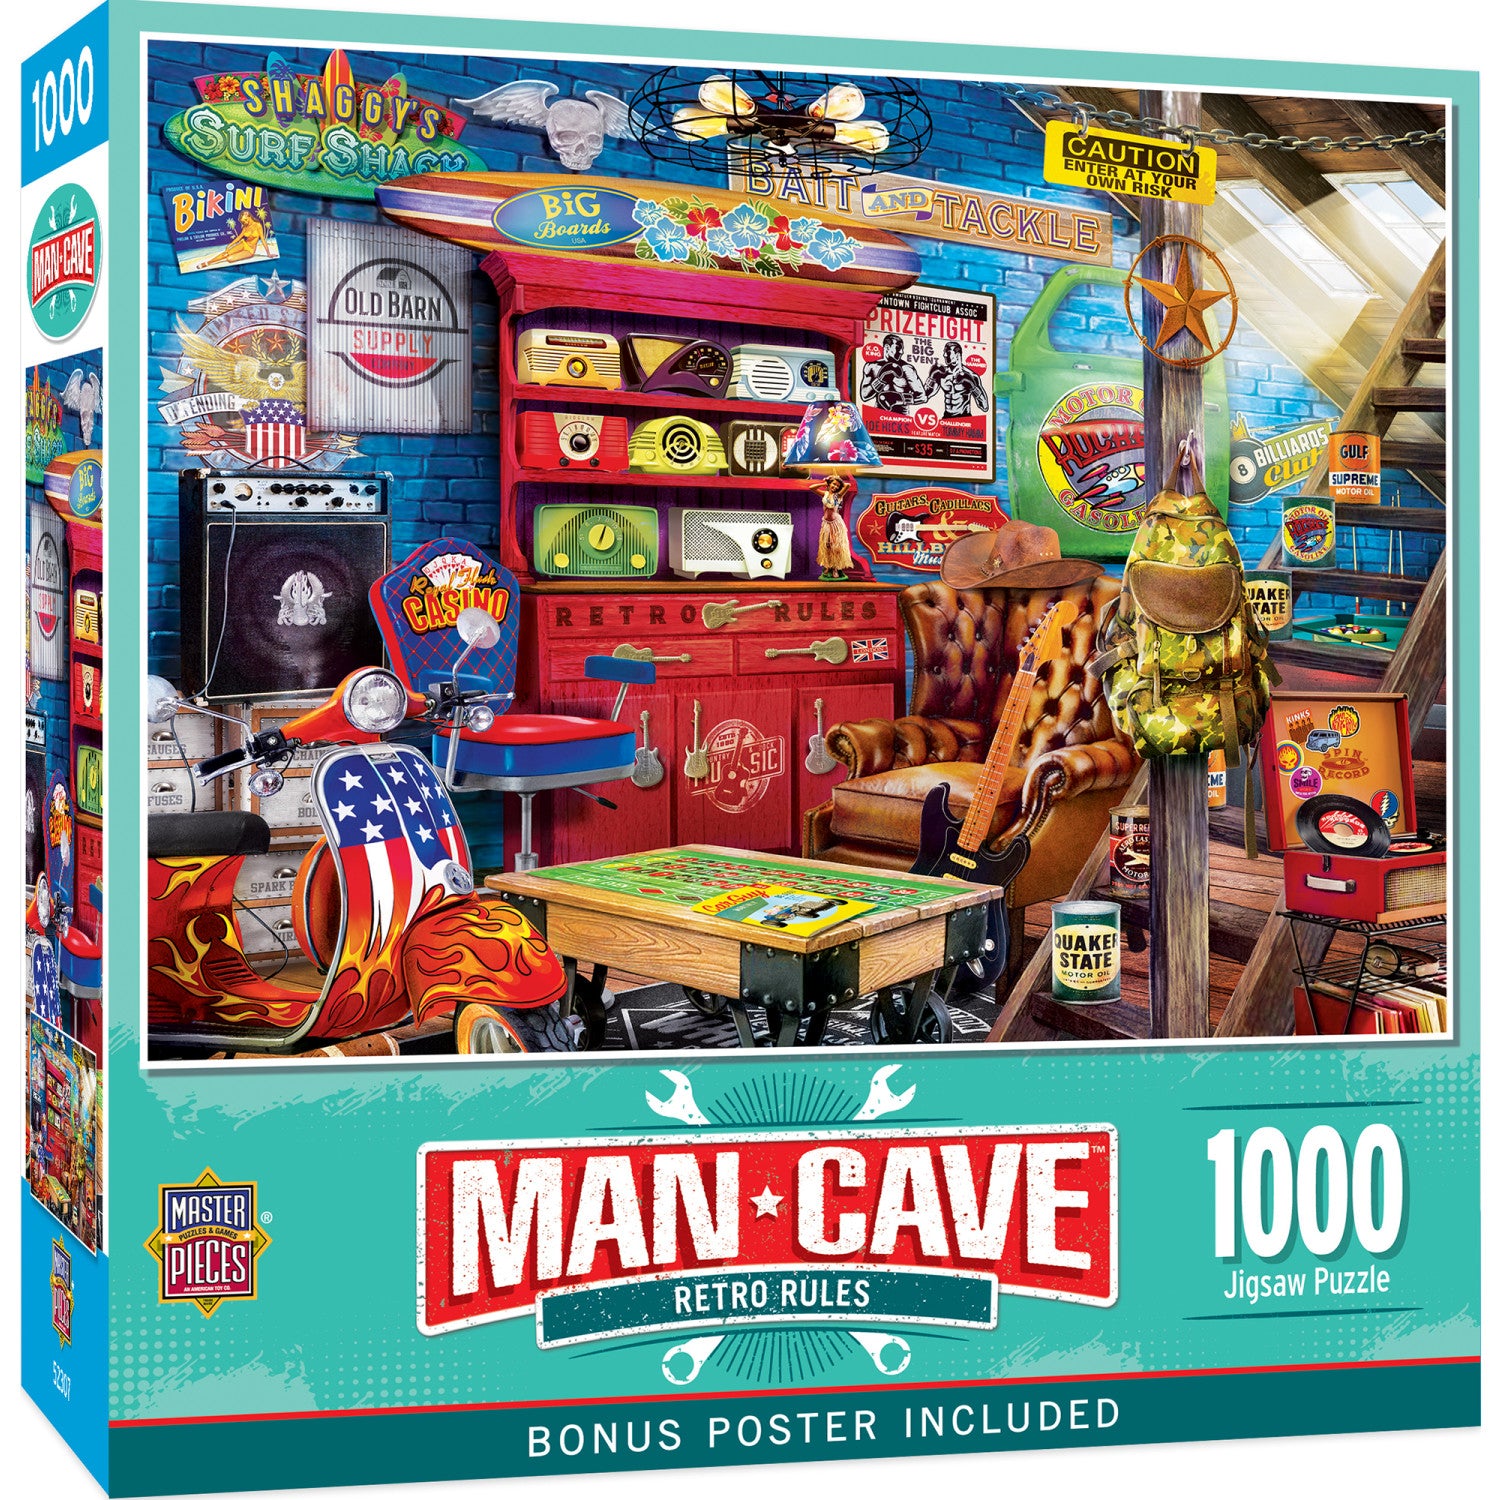 Man Cave - Retro Rules 1000 Piece Jigsaw Puzzle